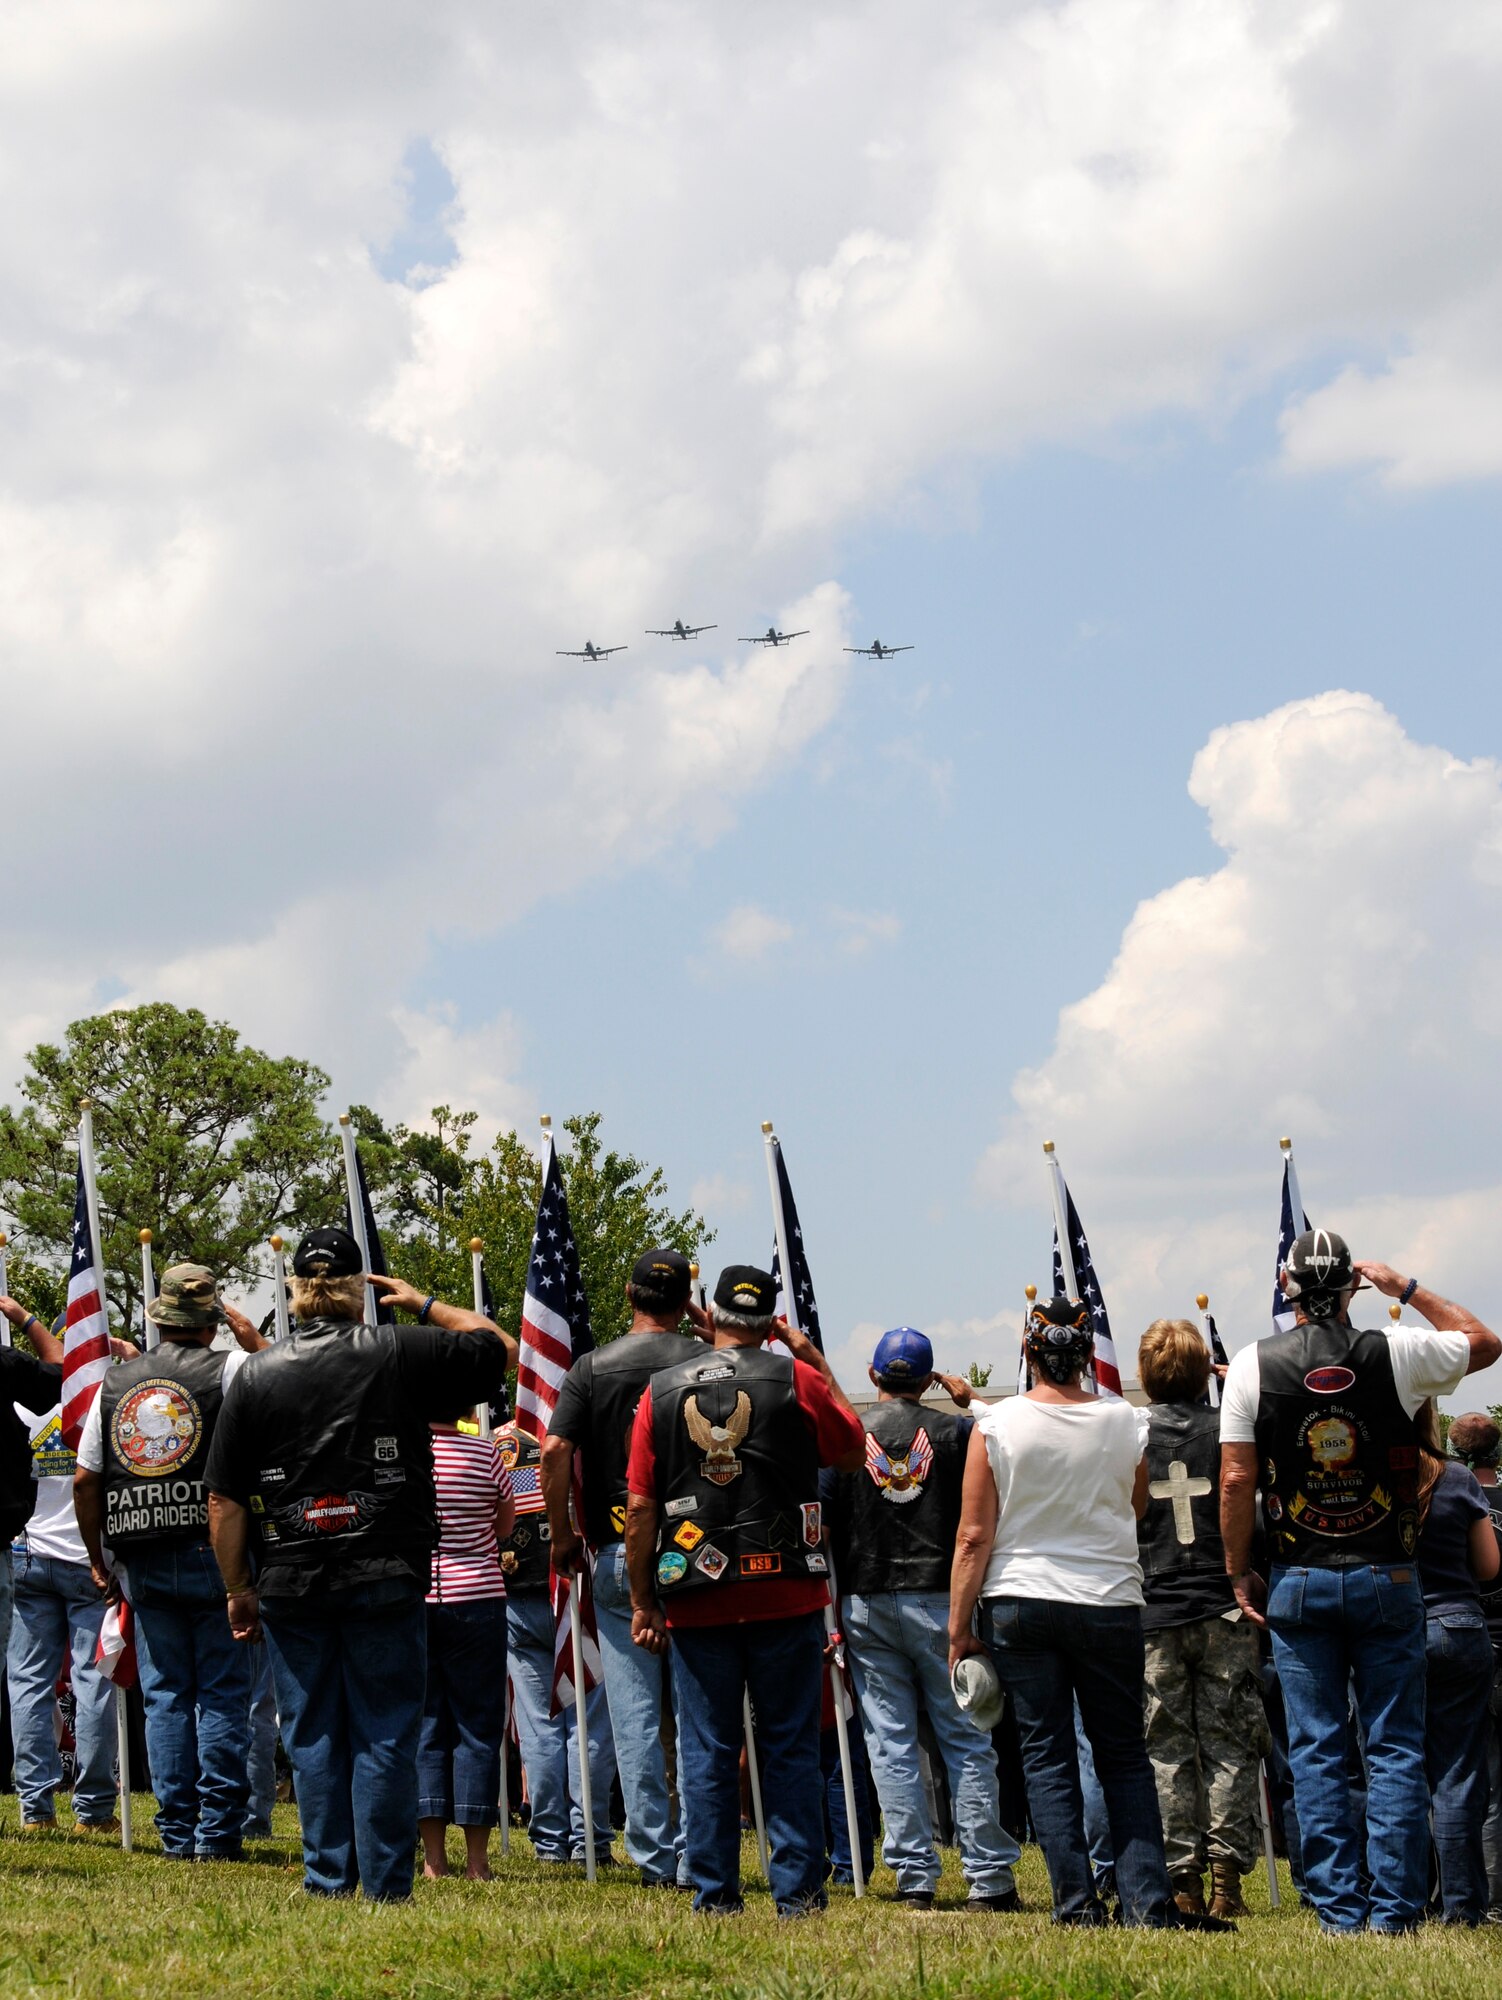 Members of the Patriot Guard salute as a four-ship of A-10C Thunderbolt II “Warthogs” with the Arkansas Air National Guard’s 188th Fighter Wing perform a missing man formation during a flyover to honor Capt. Virgil Meroney III during a repatriation ceremony held in Fayetteville, Ark., June 9, 2012. Meroney was missing in action during the Vietnam War after being shot down in his F-4D Phantom II aircraft, which crashed while carrying out a nighttime strike mission in Kahammouan Province, Laos. Meroney’s remains were identified May 24 and were returned to his family for burial with full military honors. (National Guard photo by Airman 1st Class Hannah Landeros/188th Fighter Wing Public Affairs)